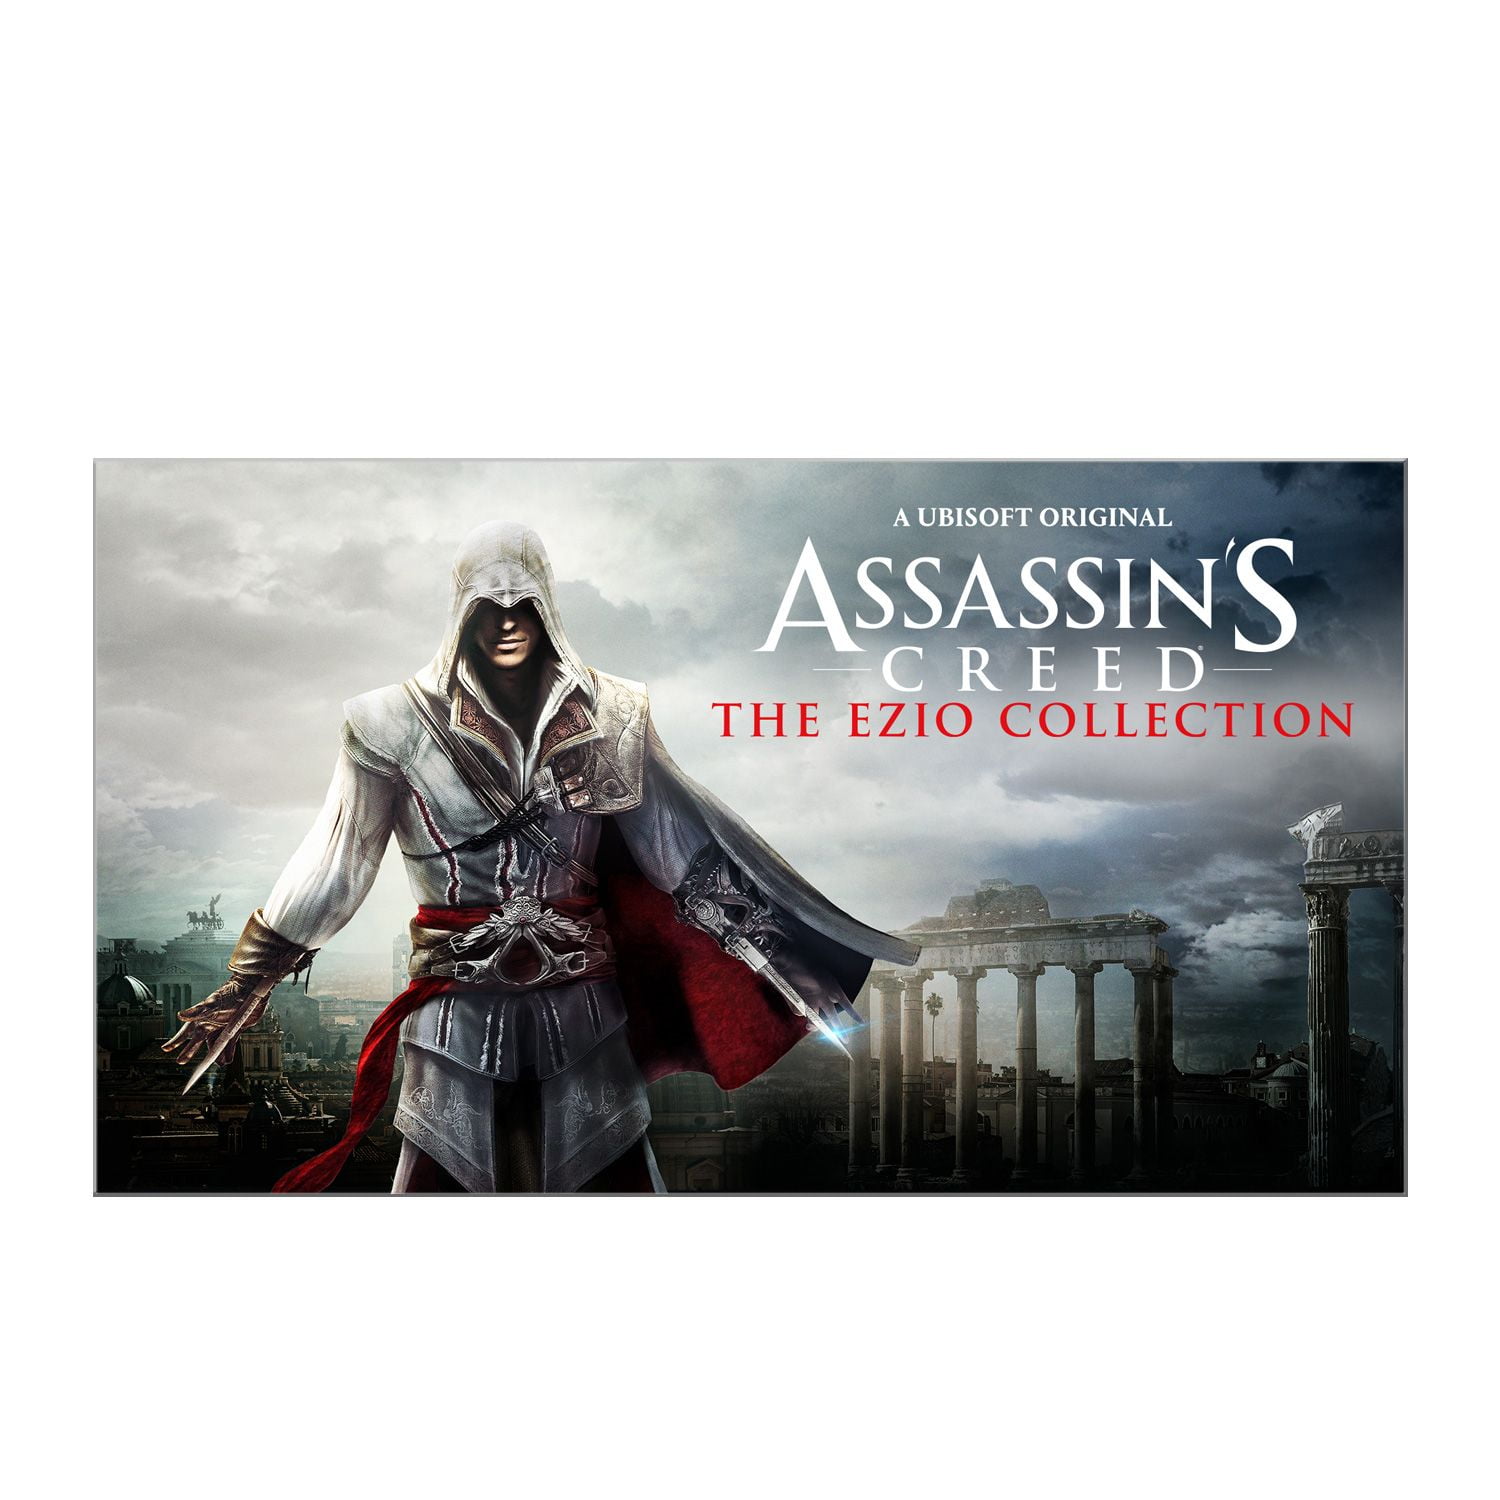 Walked into Walmart and they have Assassin's Creed The Ezio